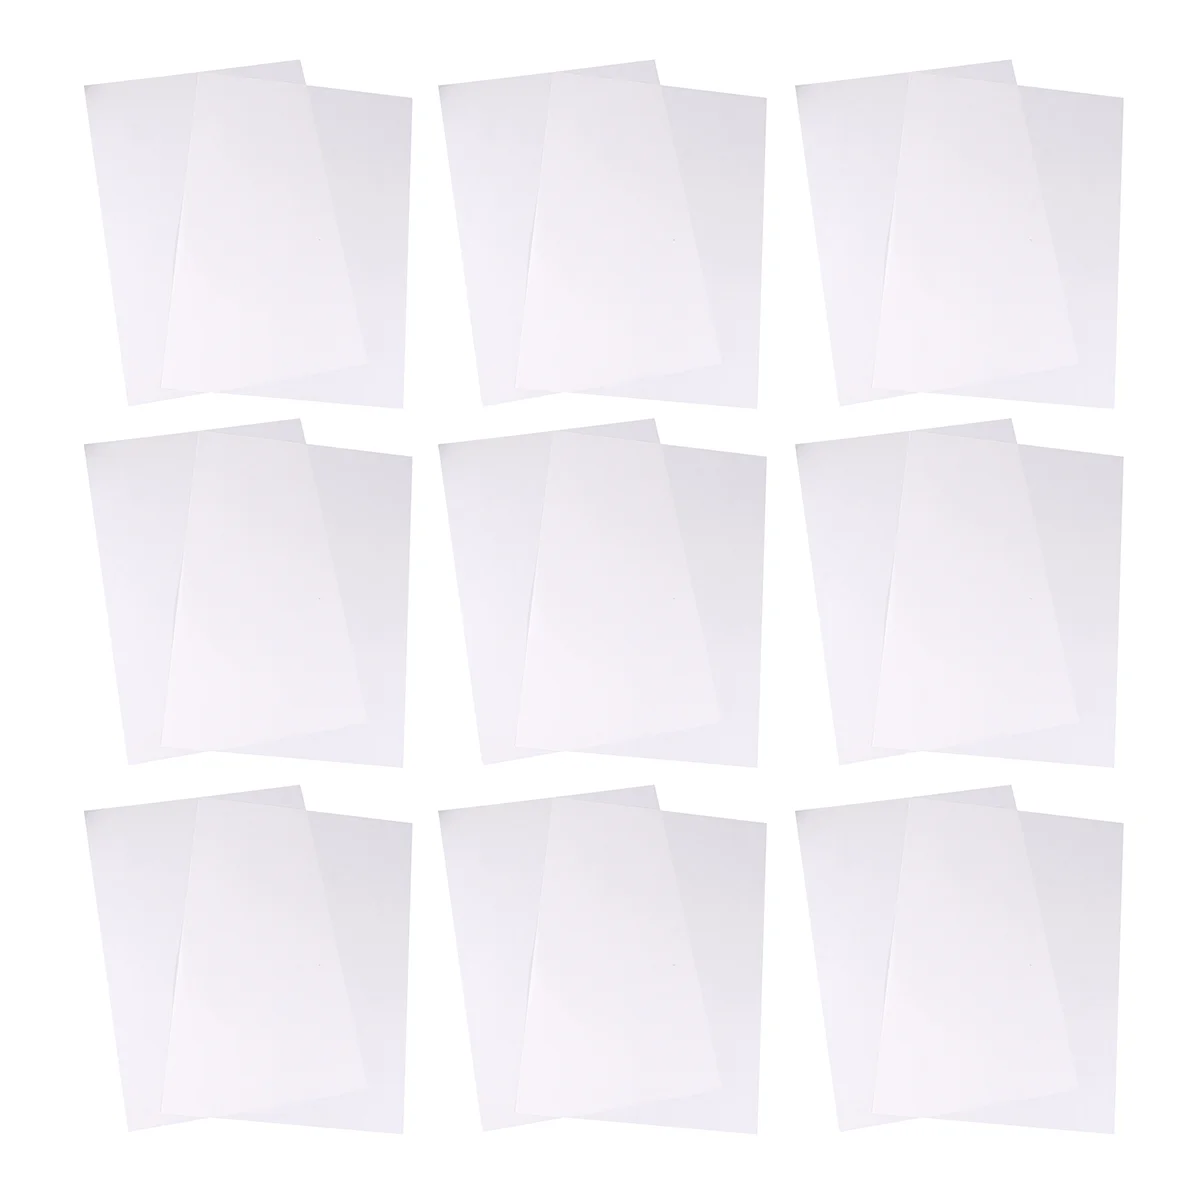 100 Sheets Release Paper Non- Double- sided 5D Painting Replacement Cover Painting Accessories for Painting Crafts ( White ) 30% hot sales 100pcs set black a4 copy carbon paper painting tracing paper graphite painting reusable painting accessories new